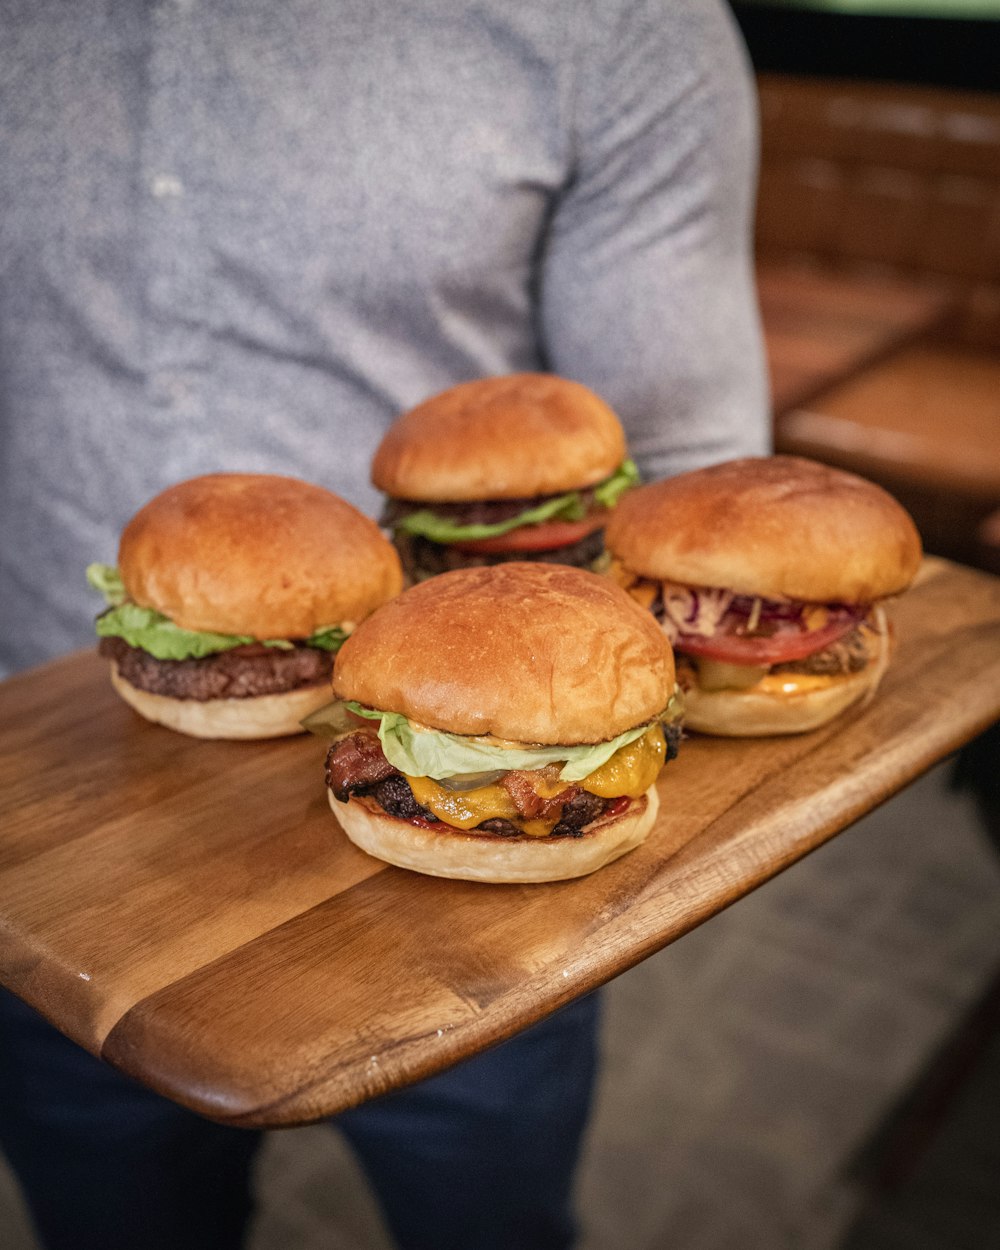 burger on brown wooden chopping board